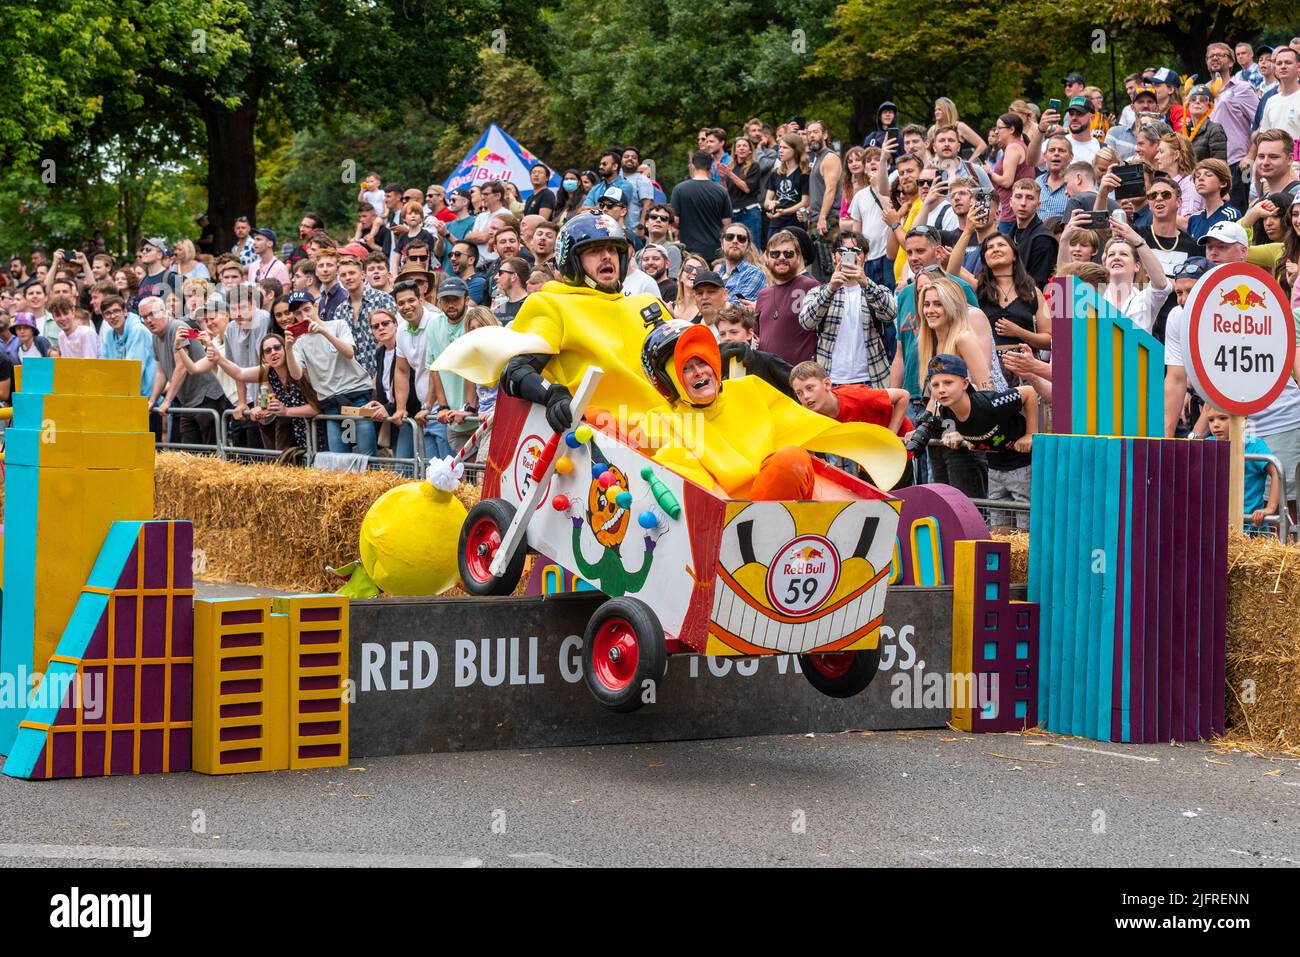 The Rookie Duckies kart taking the final jump at the Red Bull Soapbox race 2022 at Alexandra Palace in London, UK. Stock Photo